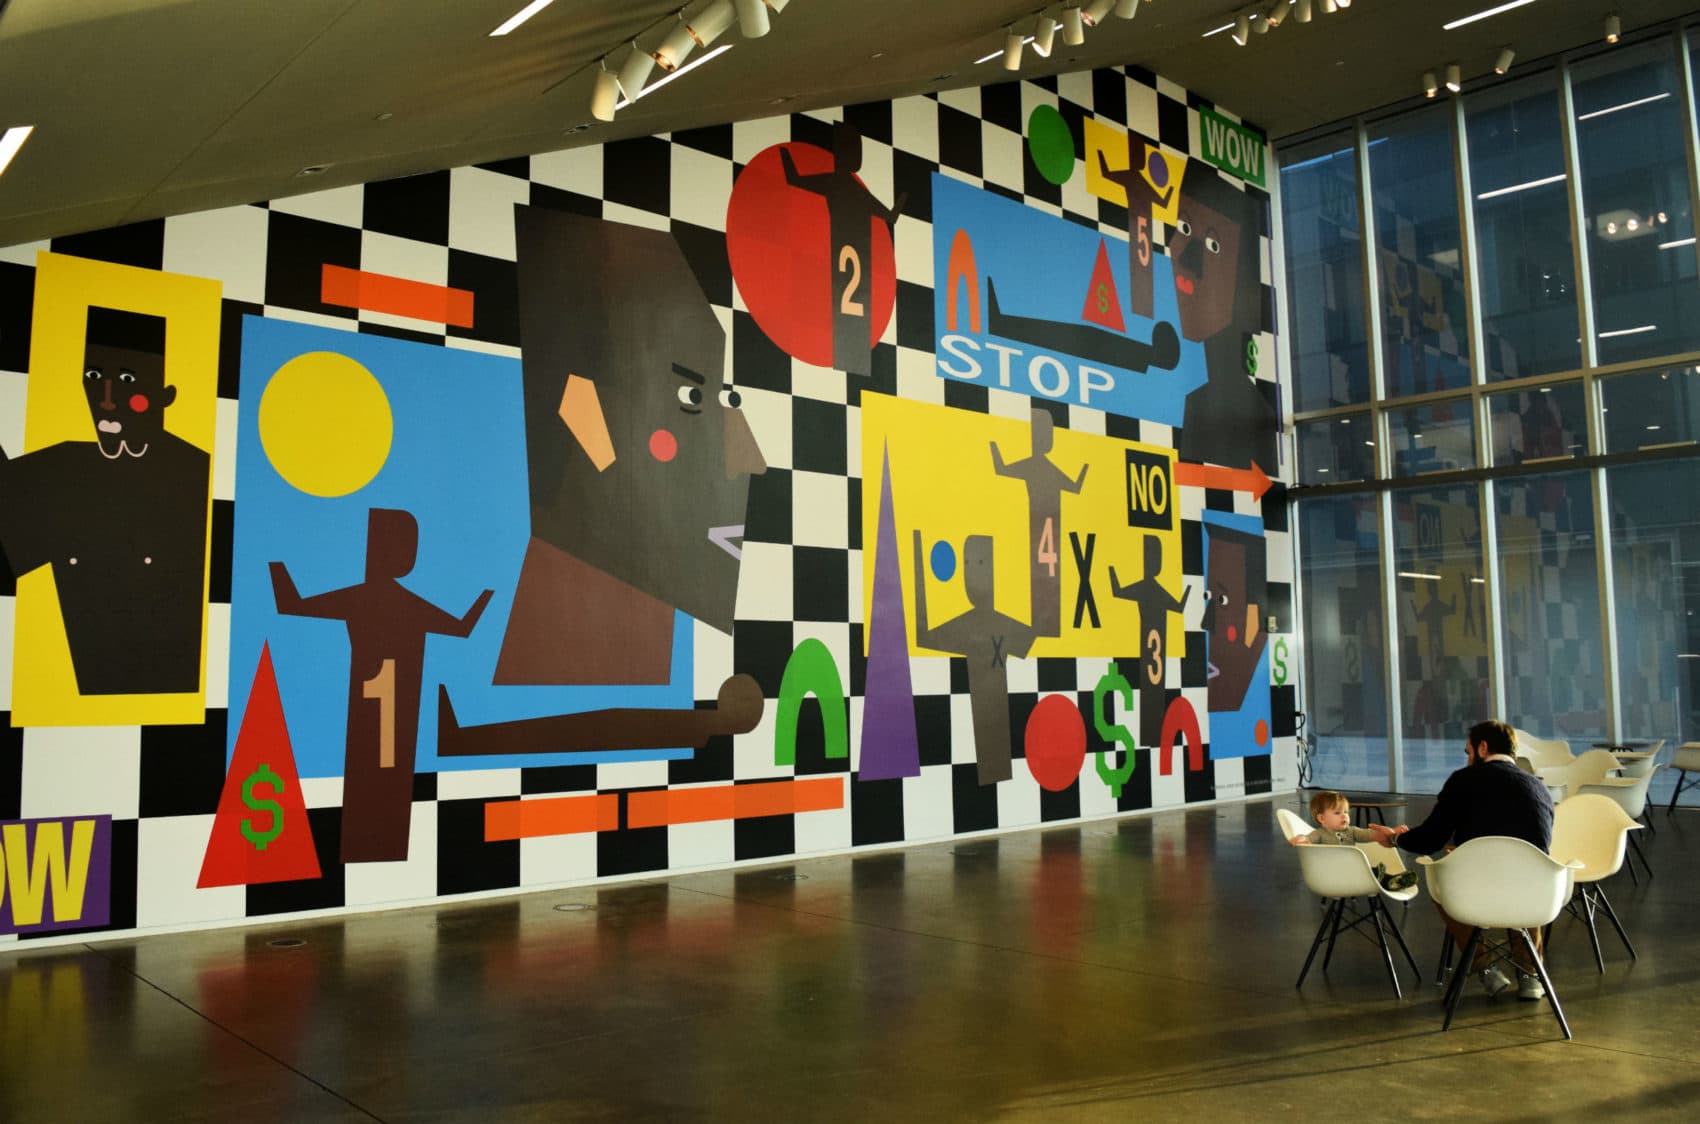 "Nina Chanel Abney" installed in the ICA's lobby. (Pien Huang for WBUR)